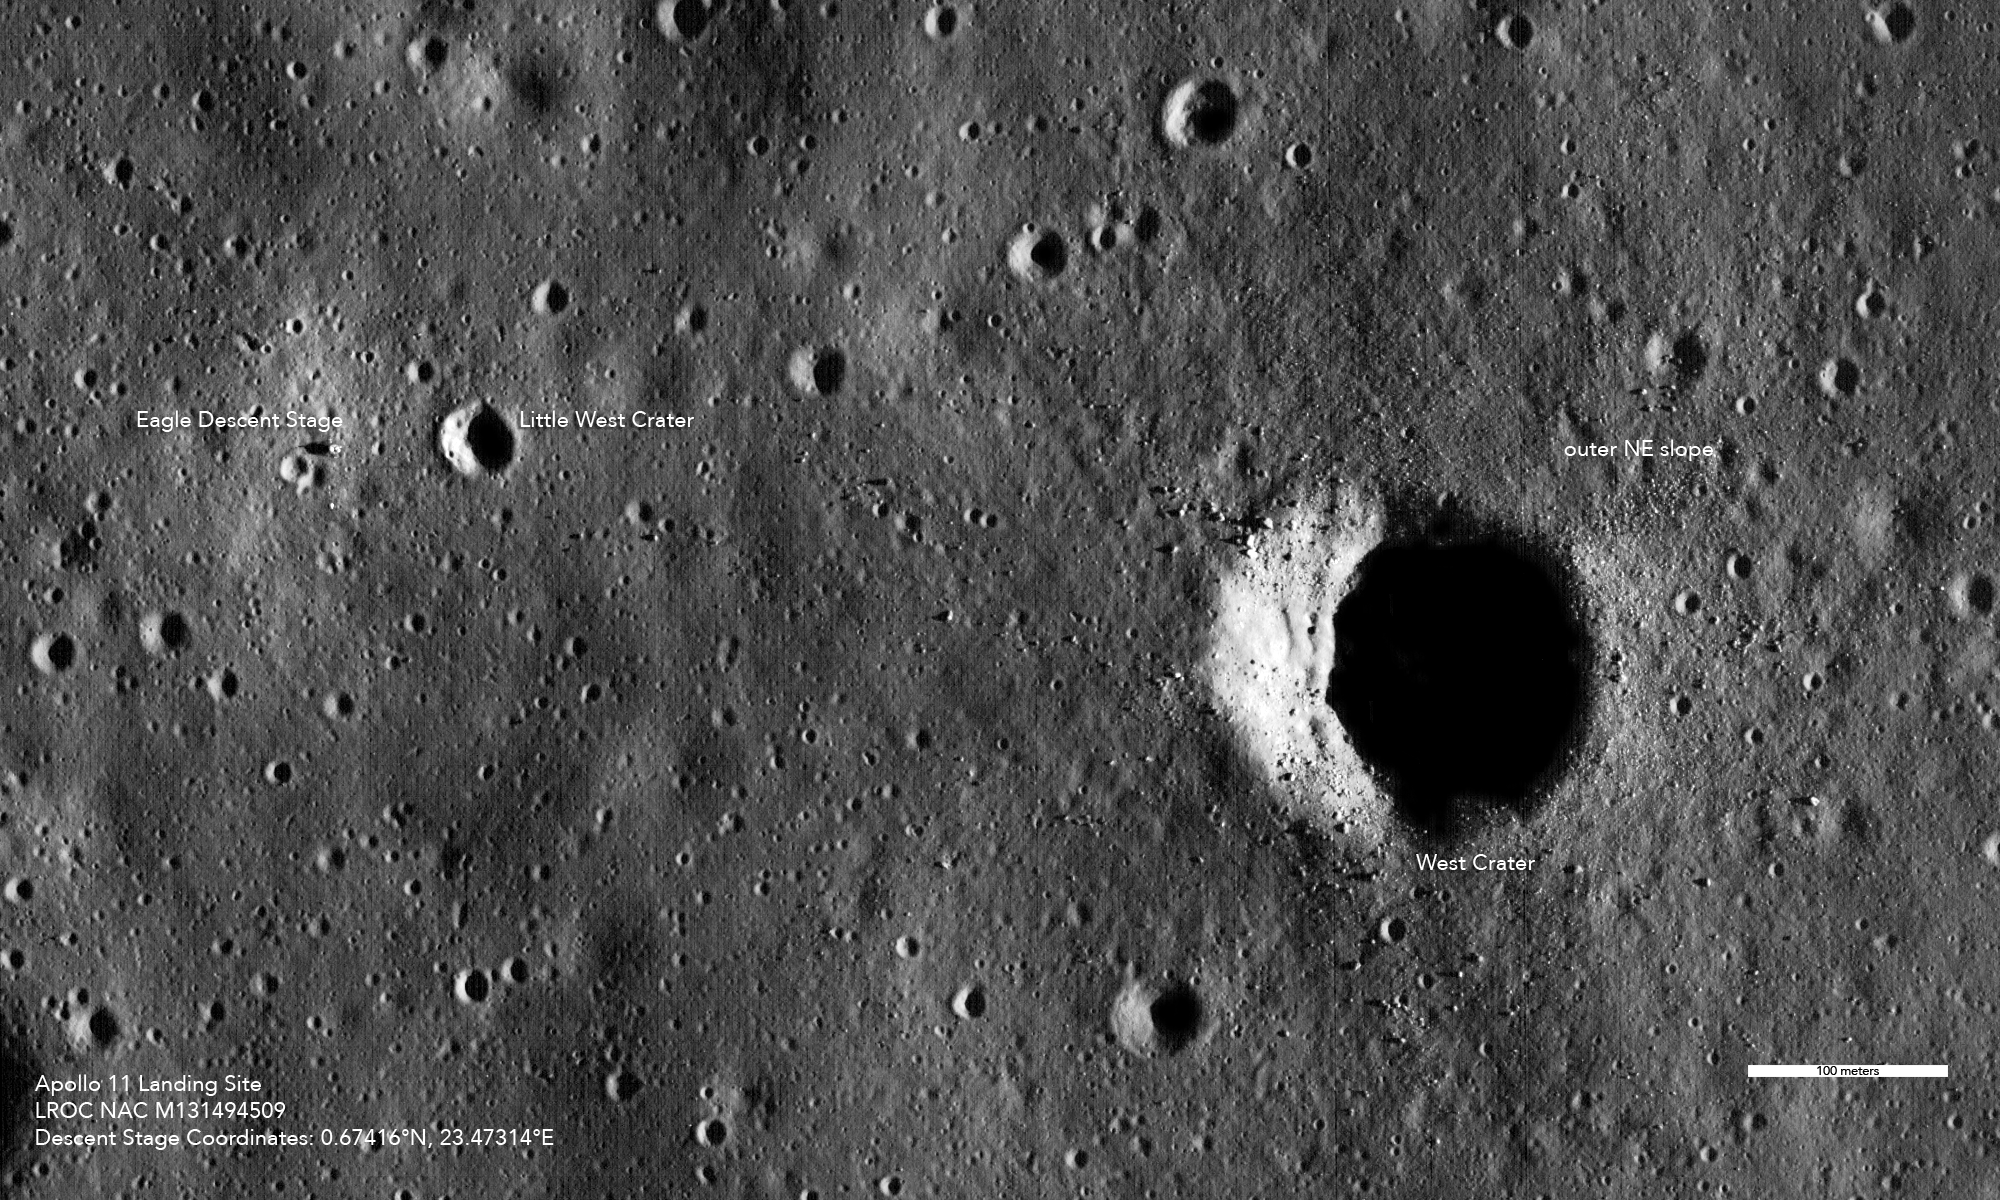 Overhead view of moon, craters, apollo lander